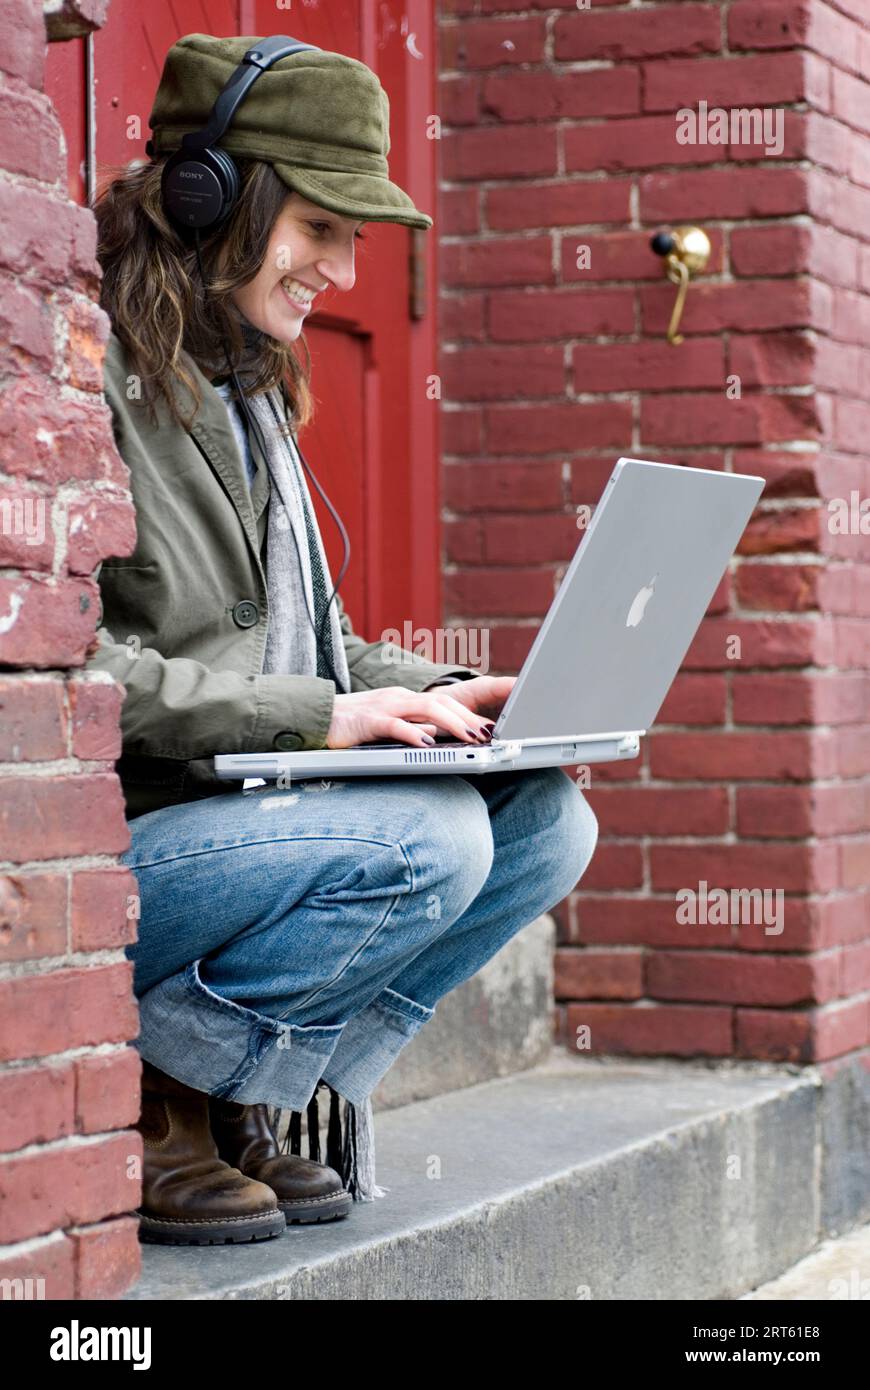 Hip woman relaxes infront of red door while working on laptop and listening to music. Stock Photo